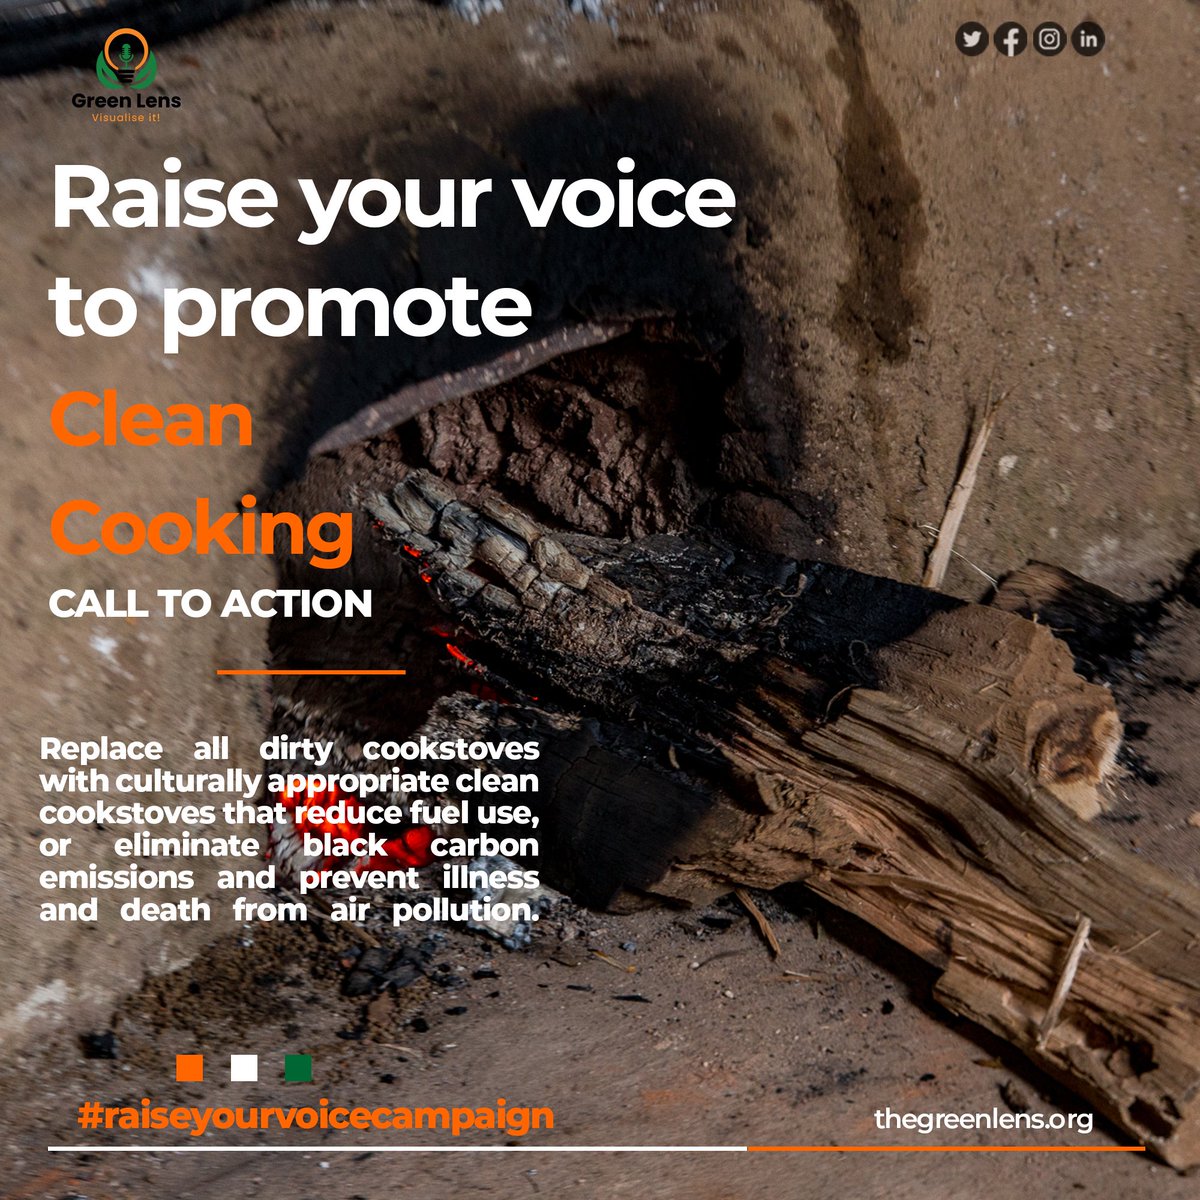 Adopt a clean cookstove now!

Join our campaign now! Get in touch with us on +256775626306 to partner with us!
#raiseyourvoicecampaign #greenlensug #climateaction #climatechange #environmentalconservation #environmentalprotection #cleanenerg #cleancookstoves #cleancooking